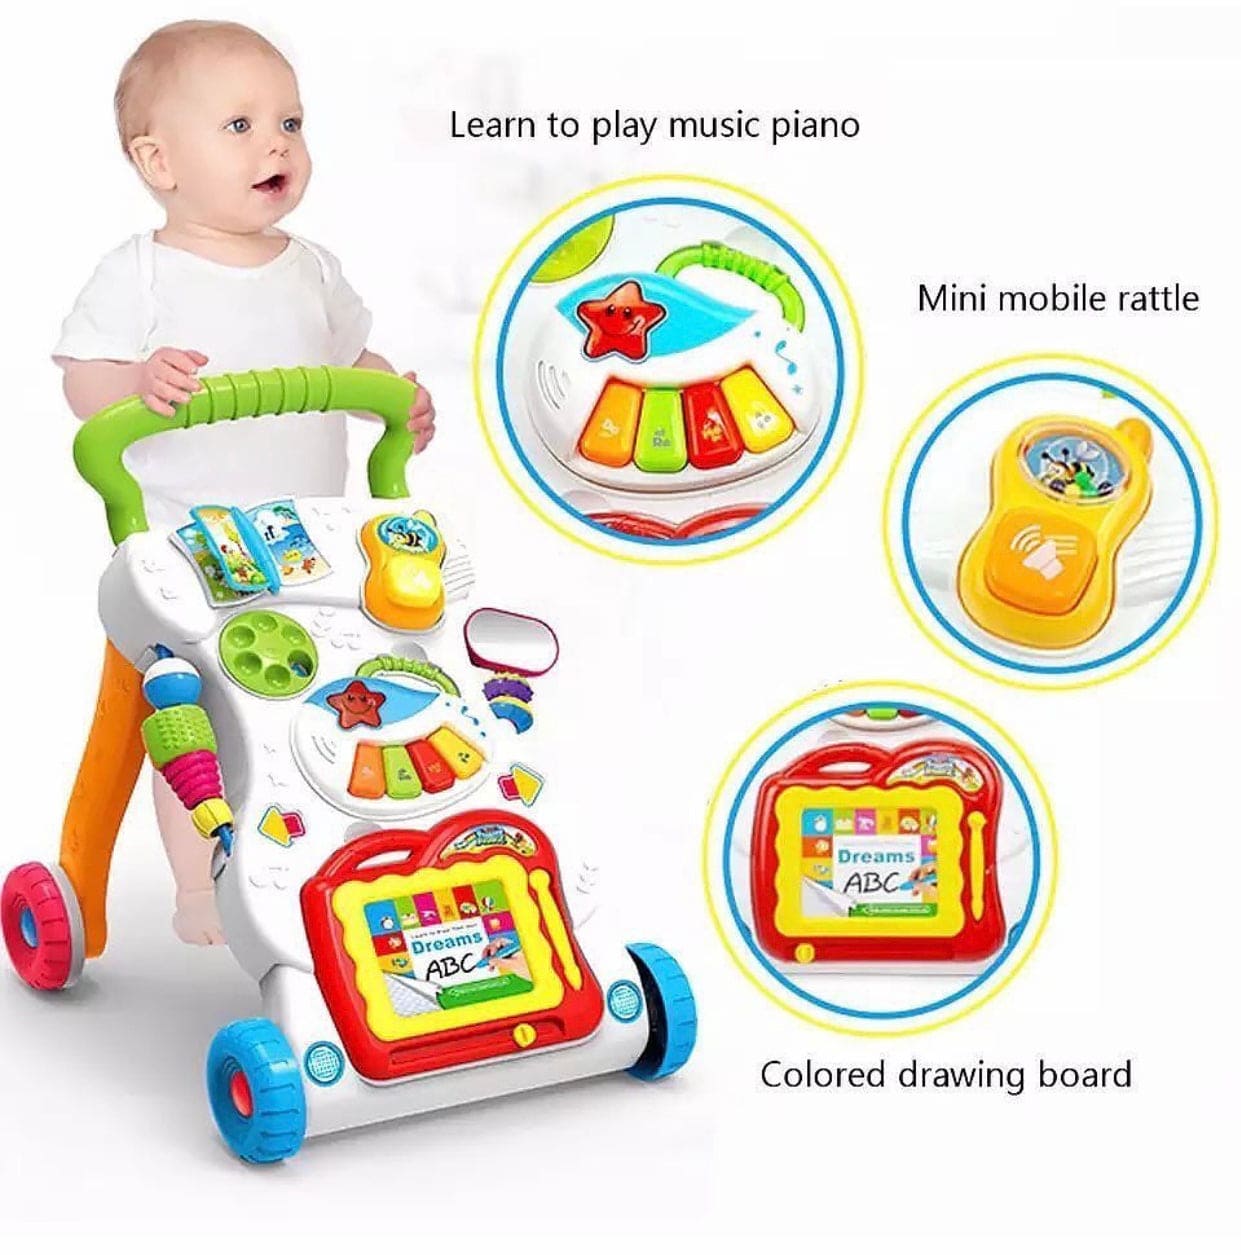 Baby Walker Toddler Trolley, Sit To Stand ABS Musical Walker With Adjustable Height, 3 in 1 Baby Walker Sit To Stand Toy, Toddlers Musical Fun Learning Walker